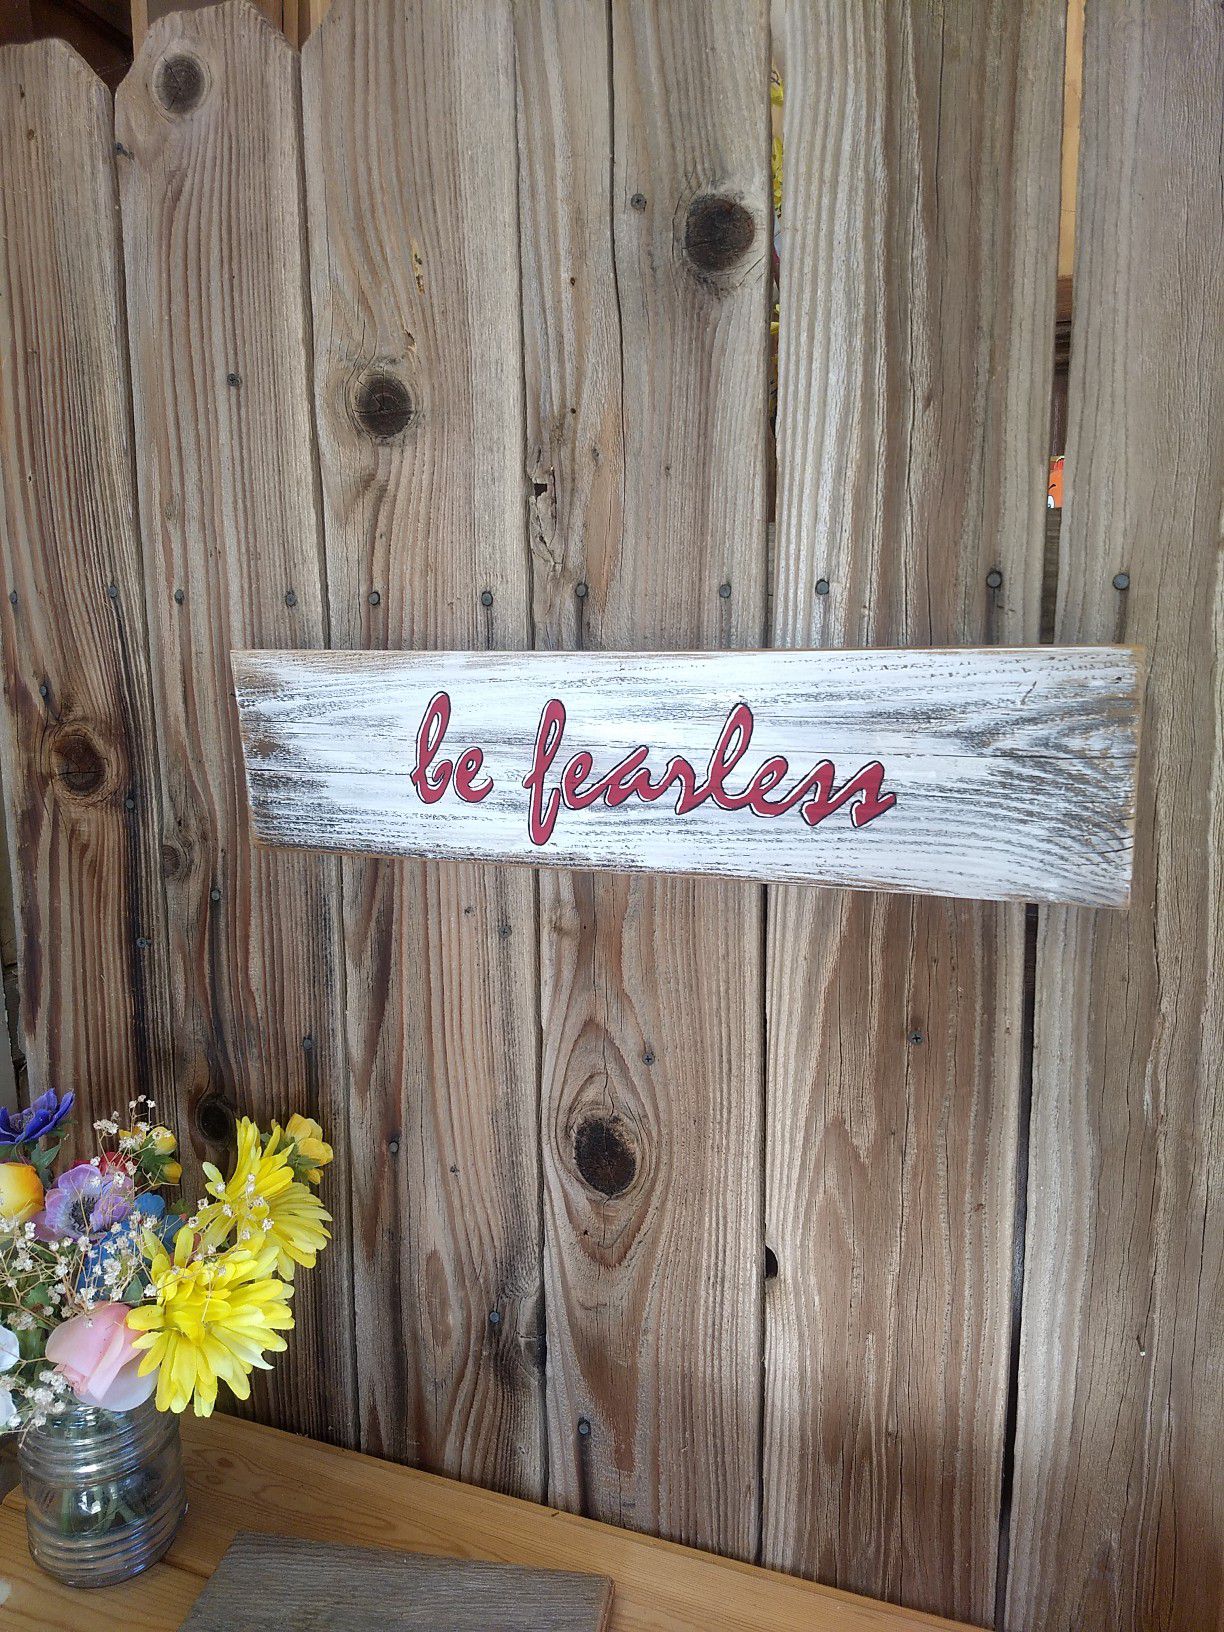 Sign "be fearless" Hand painted by local artisan in Atascadero